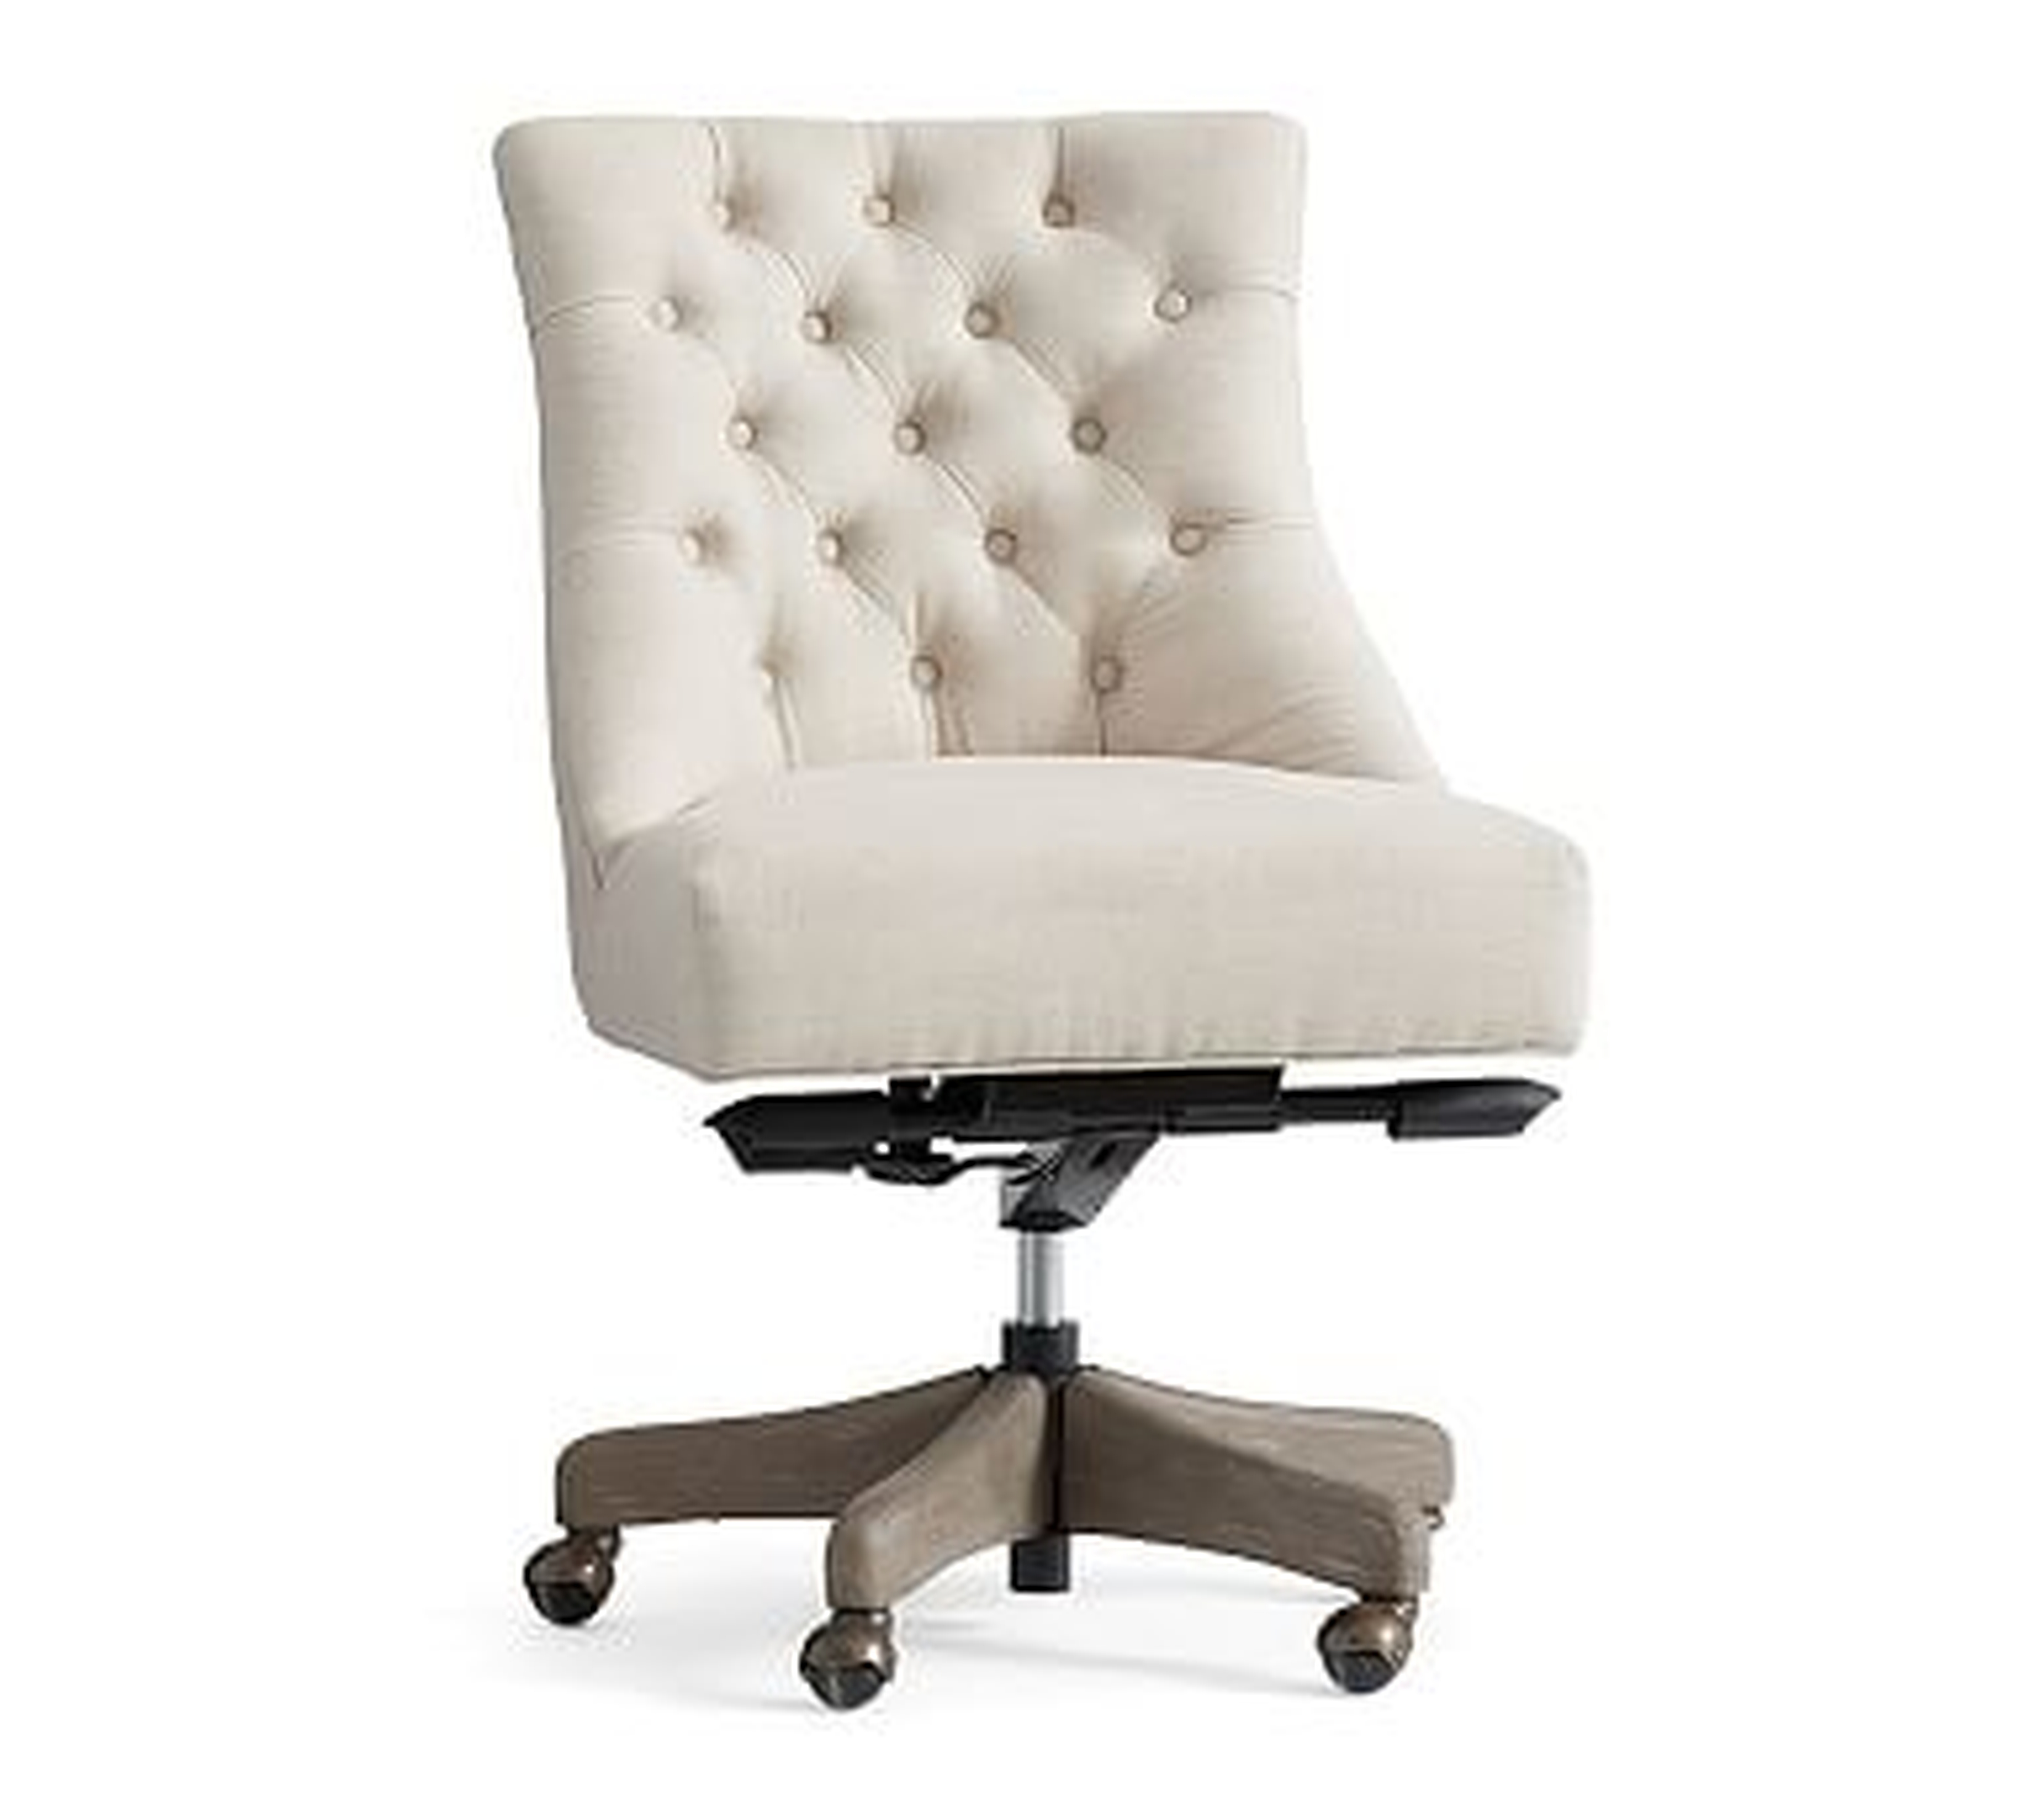 Hayes Upholstered Tufted Swivel Desk Chair with Gray Wash Frame, Performance Heathered Tweed Desert - Pottery Barn